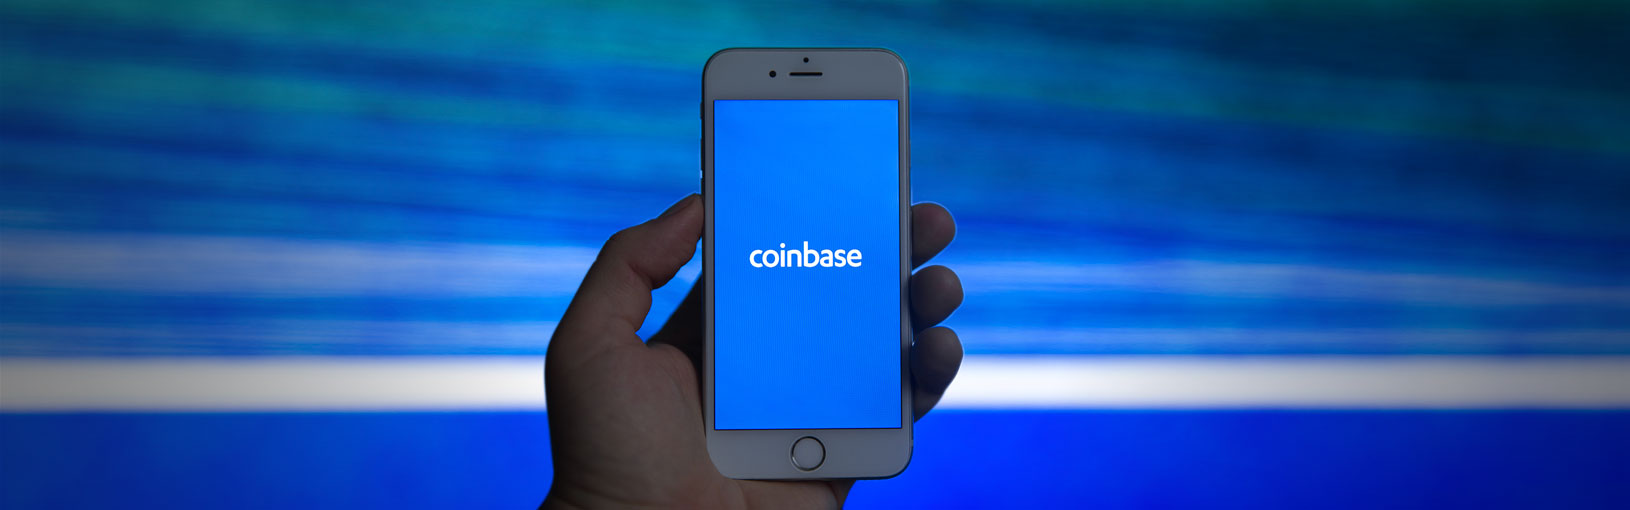 Coinbase is evaluating IEO and STO platforms » Brave New Coin